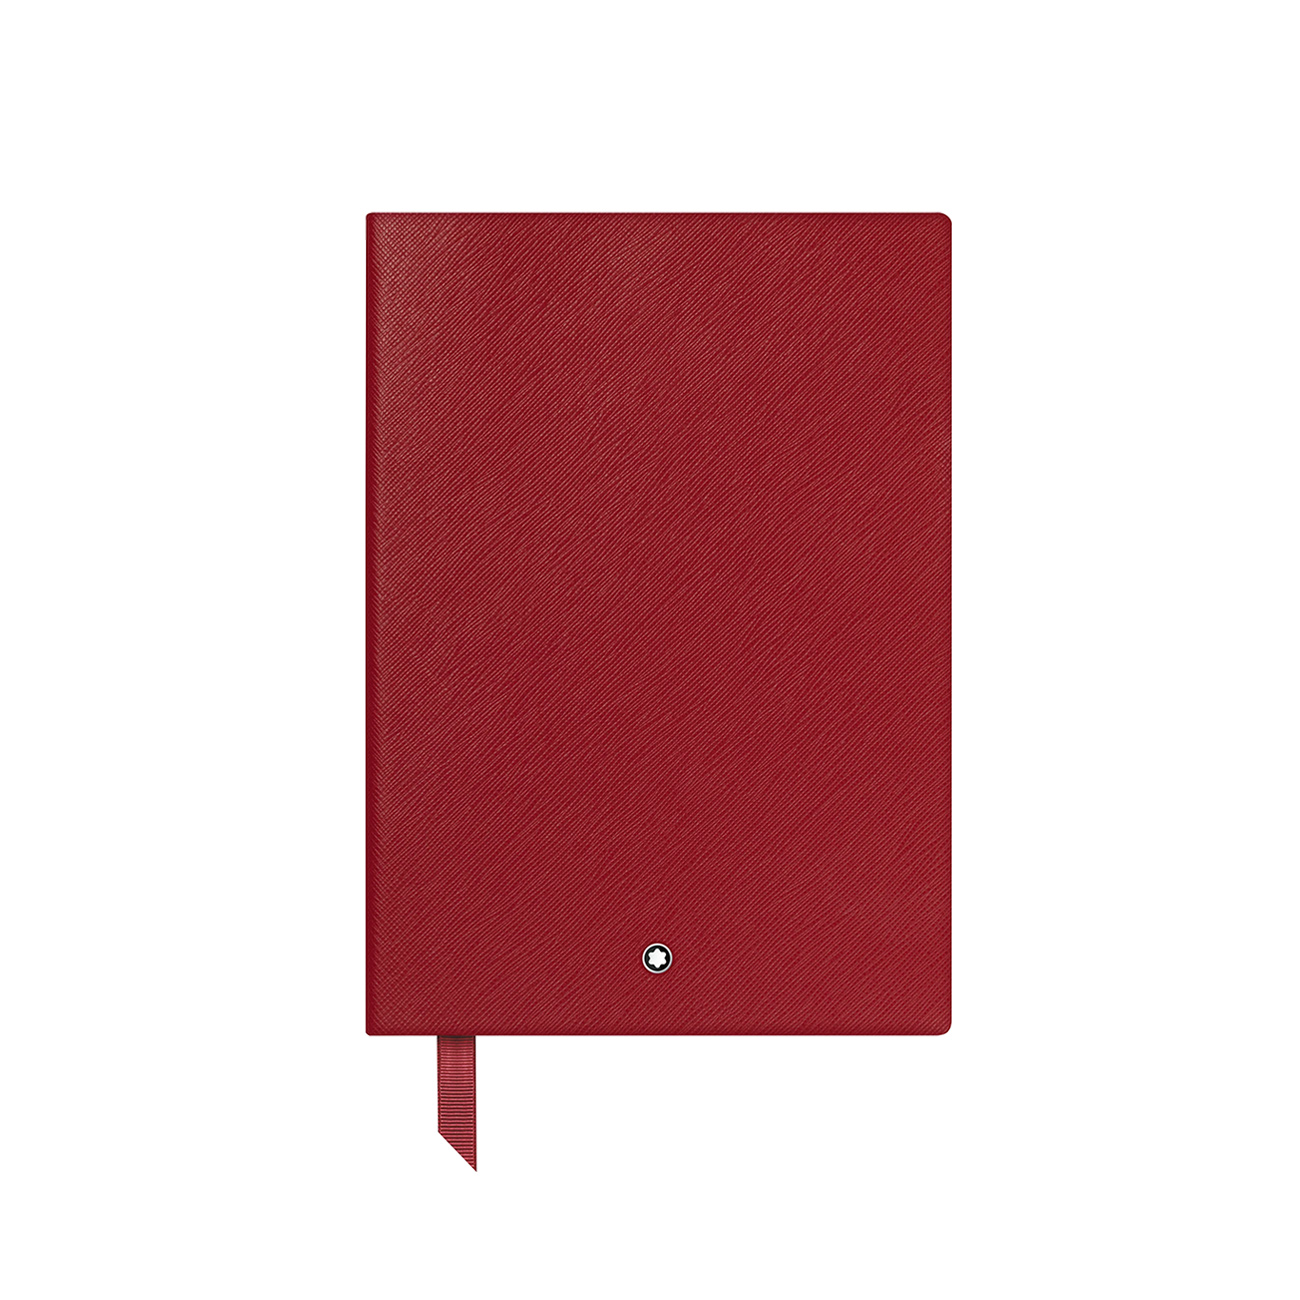 Montblanc Fine Stationery Notebook #146 Red